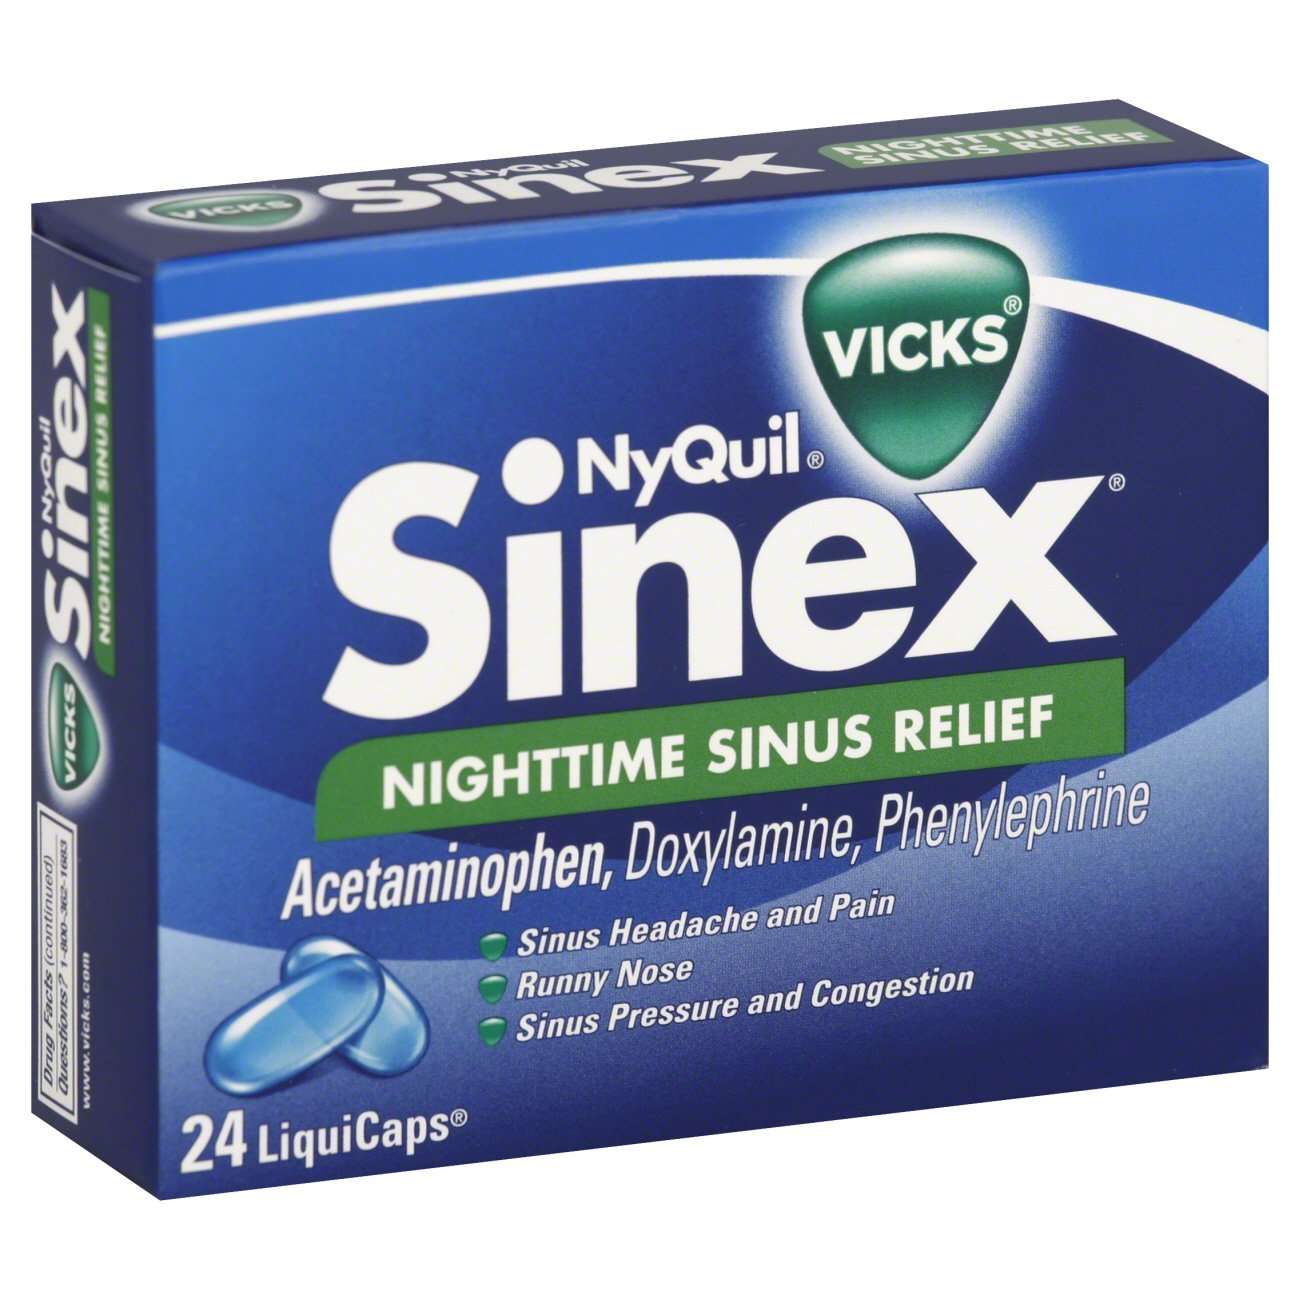 Vicks NyQuil Sinex Nighttime Sinus Relief LiquiCaps